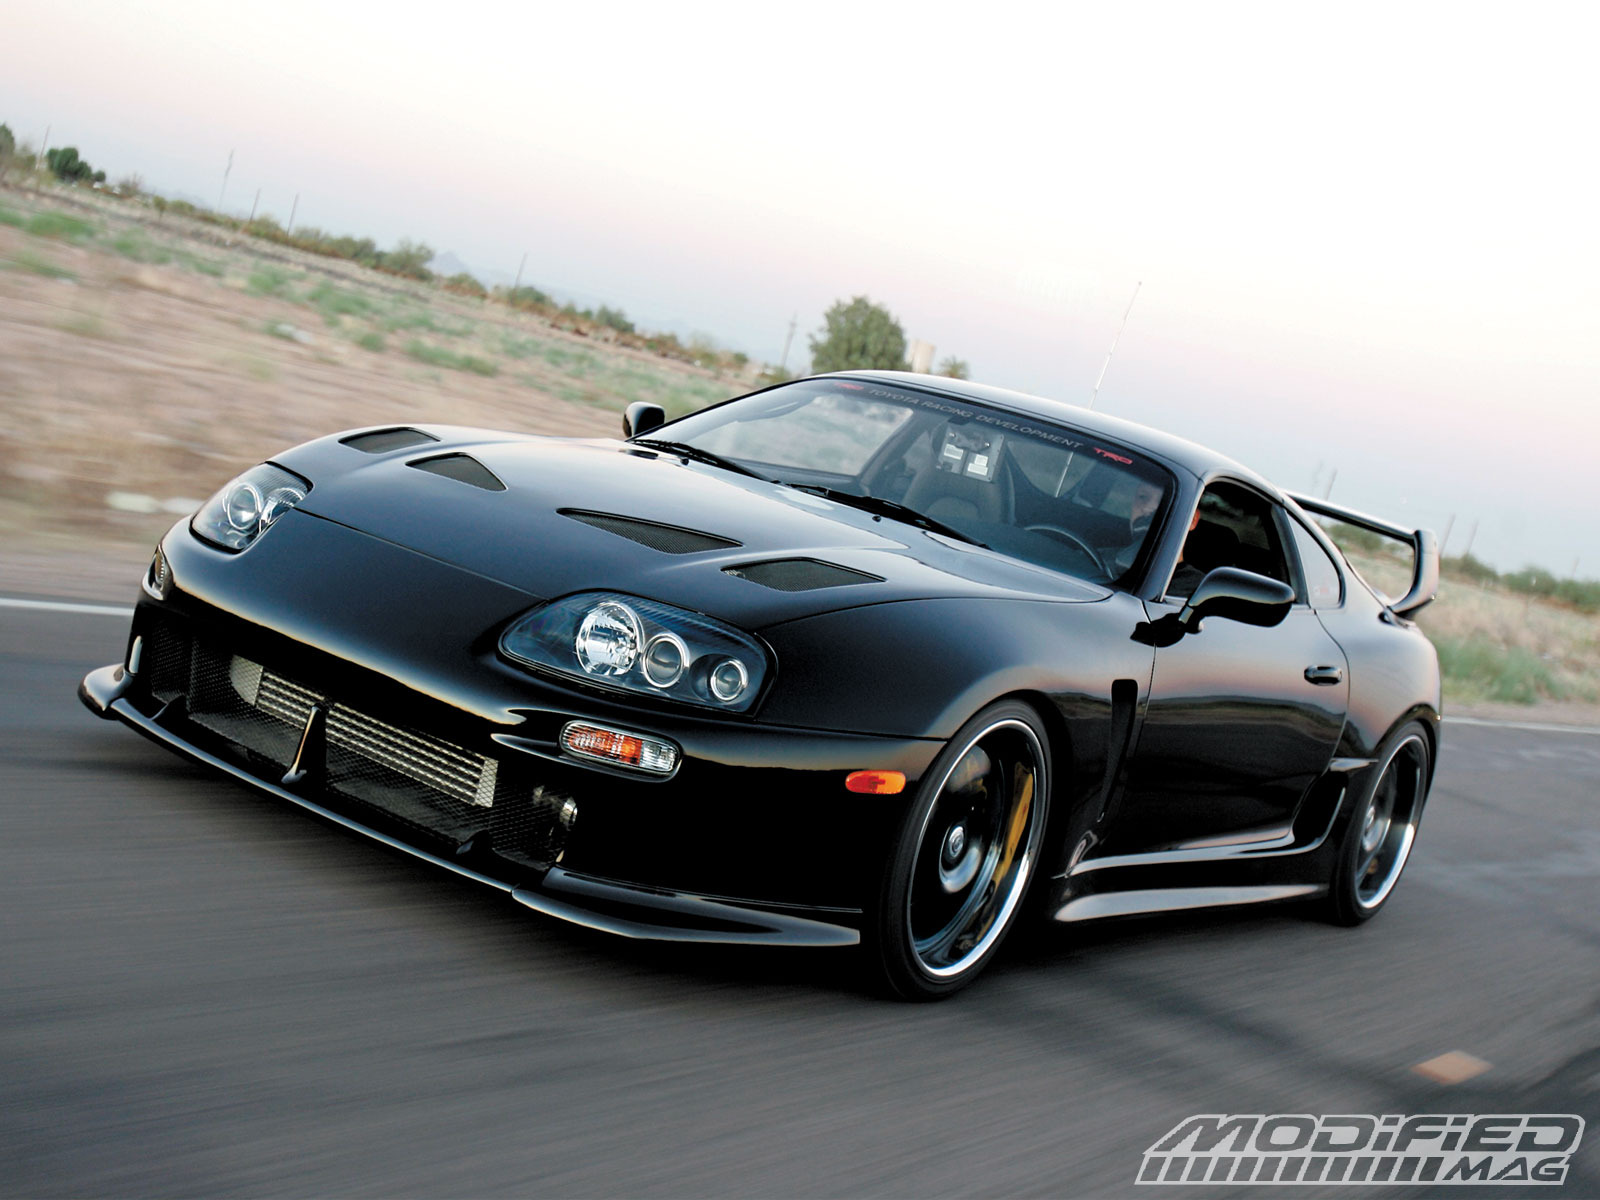 Toyota Supra Wallpapers 5516 Hd Wallpapers in Cars   Imagescicom